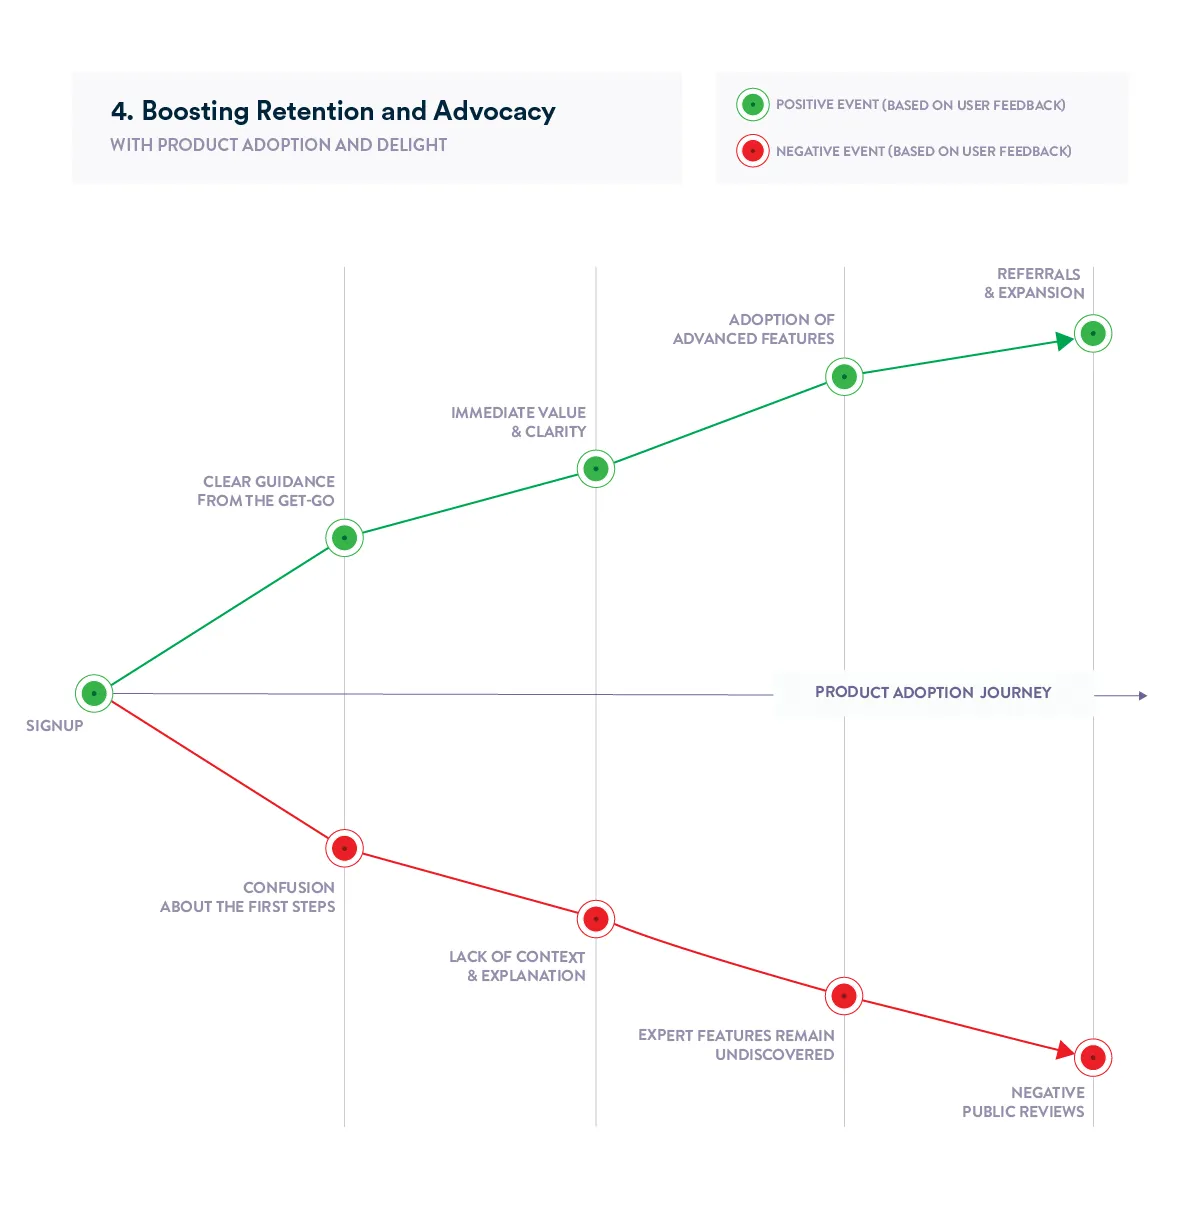 Product Adoption Journey chart - customer retention and delight